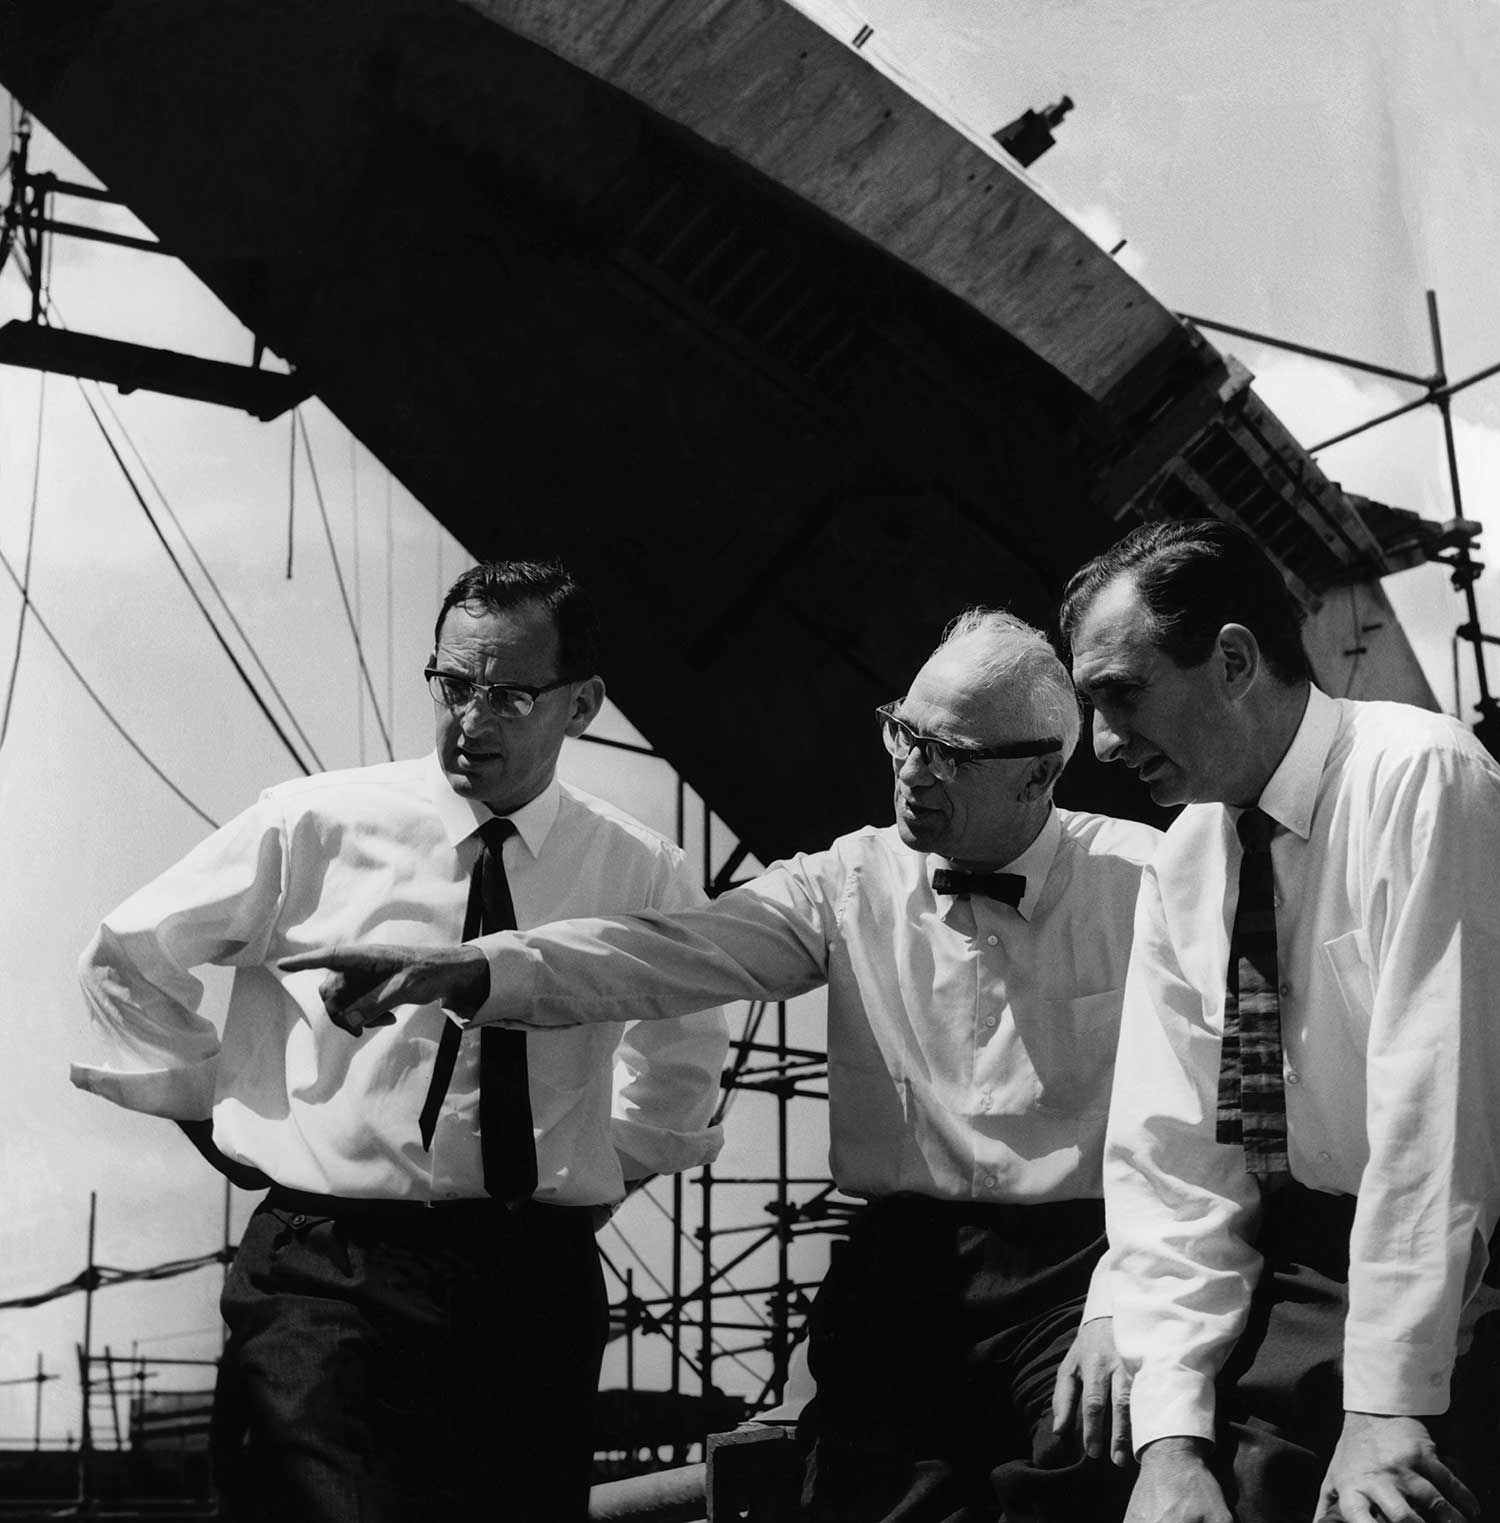 Michael Lewis, Sir Ove Arup and Jack Zunz on site in 1966 © Max Dupain